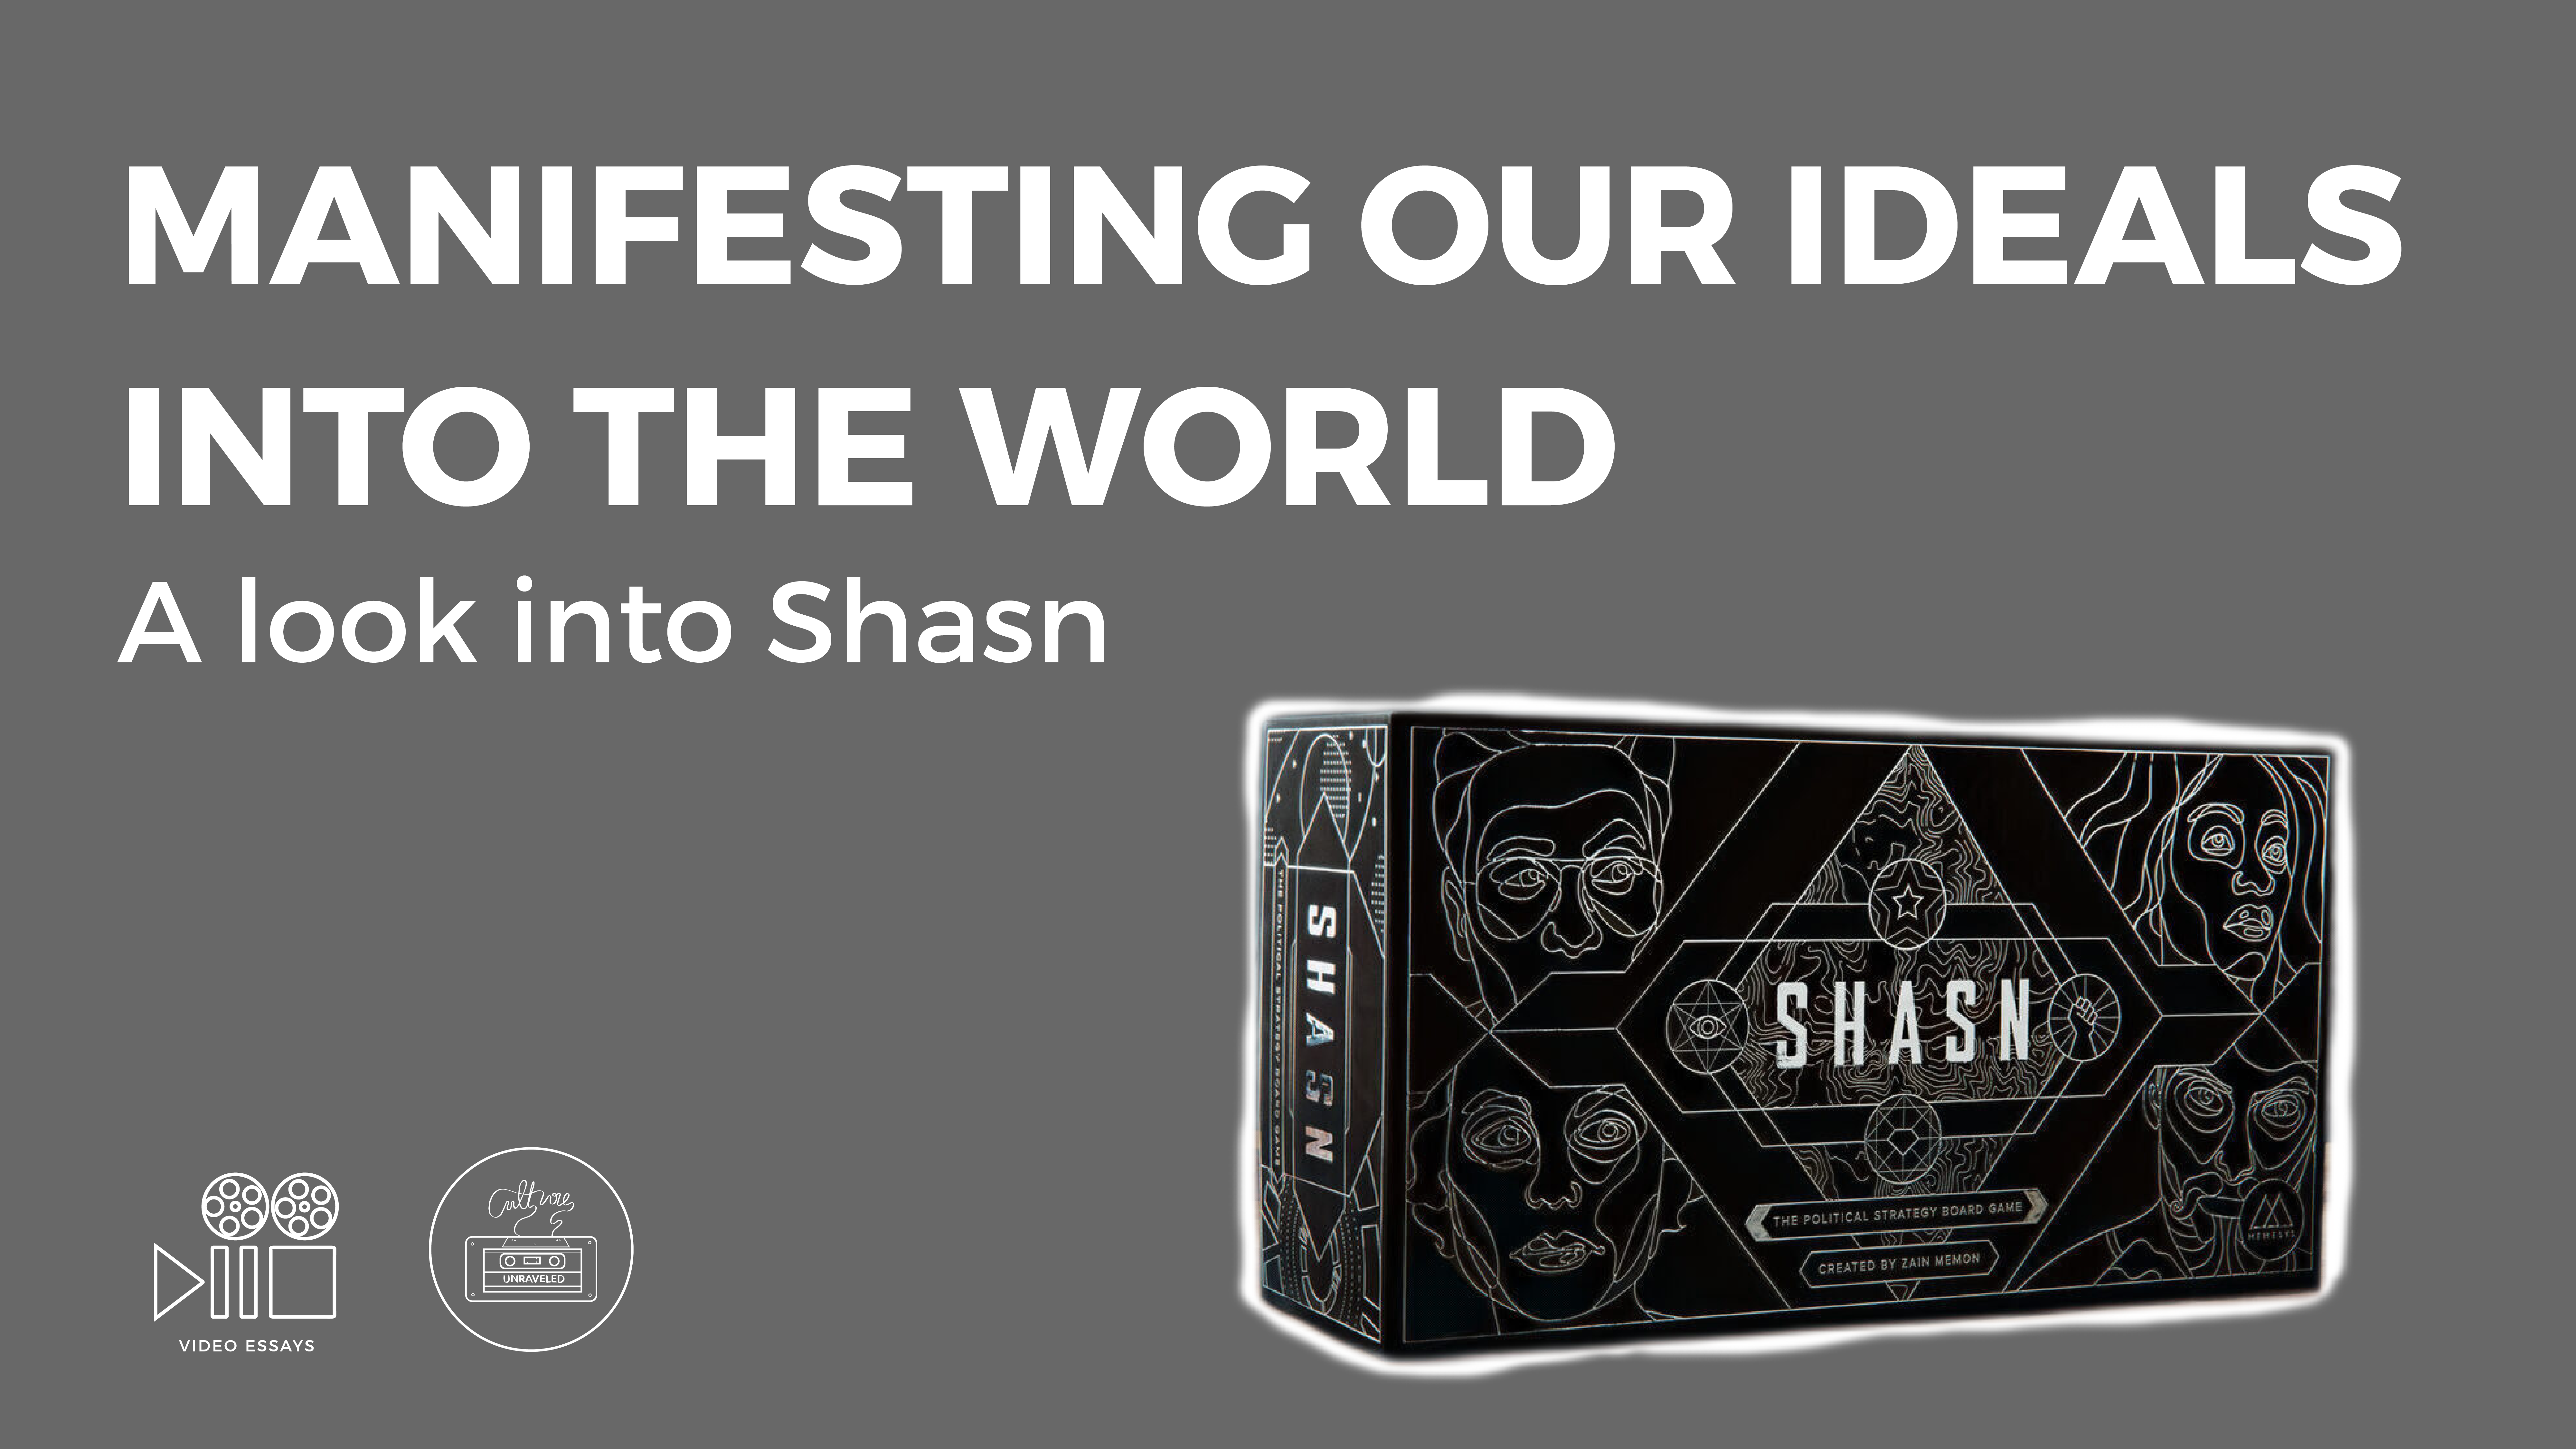 Manifesting our Ideals into the World. A Look into Shasn